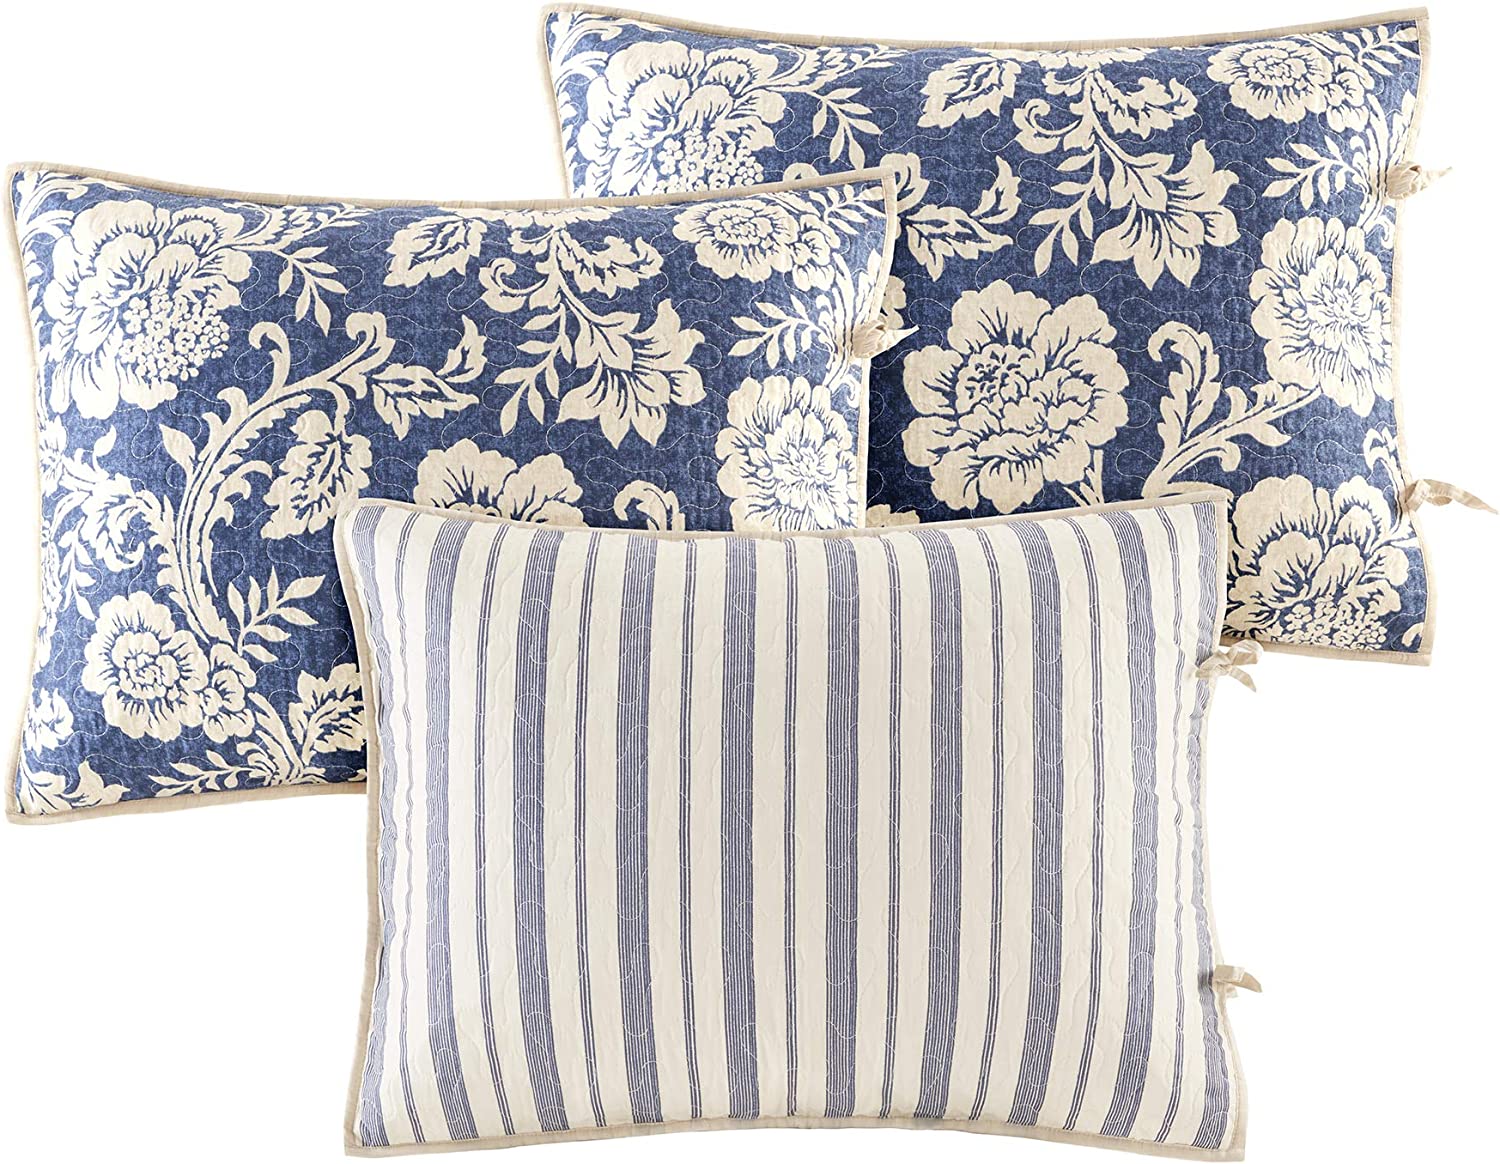 Madison Park Lucy Daybed Set, Navy